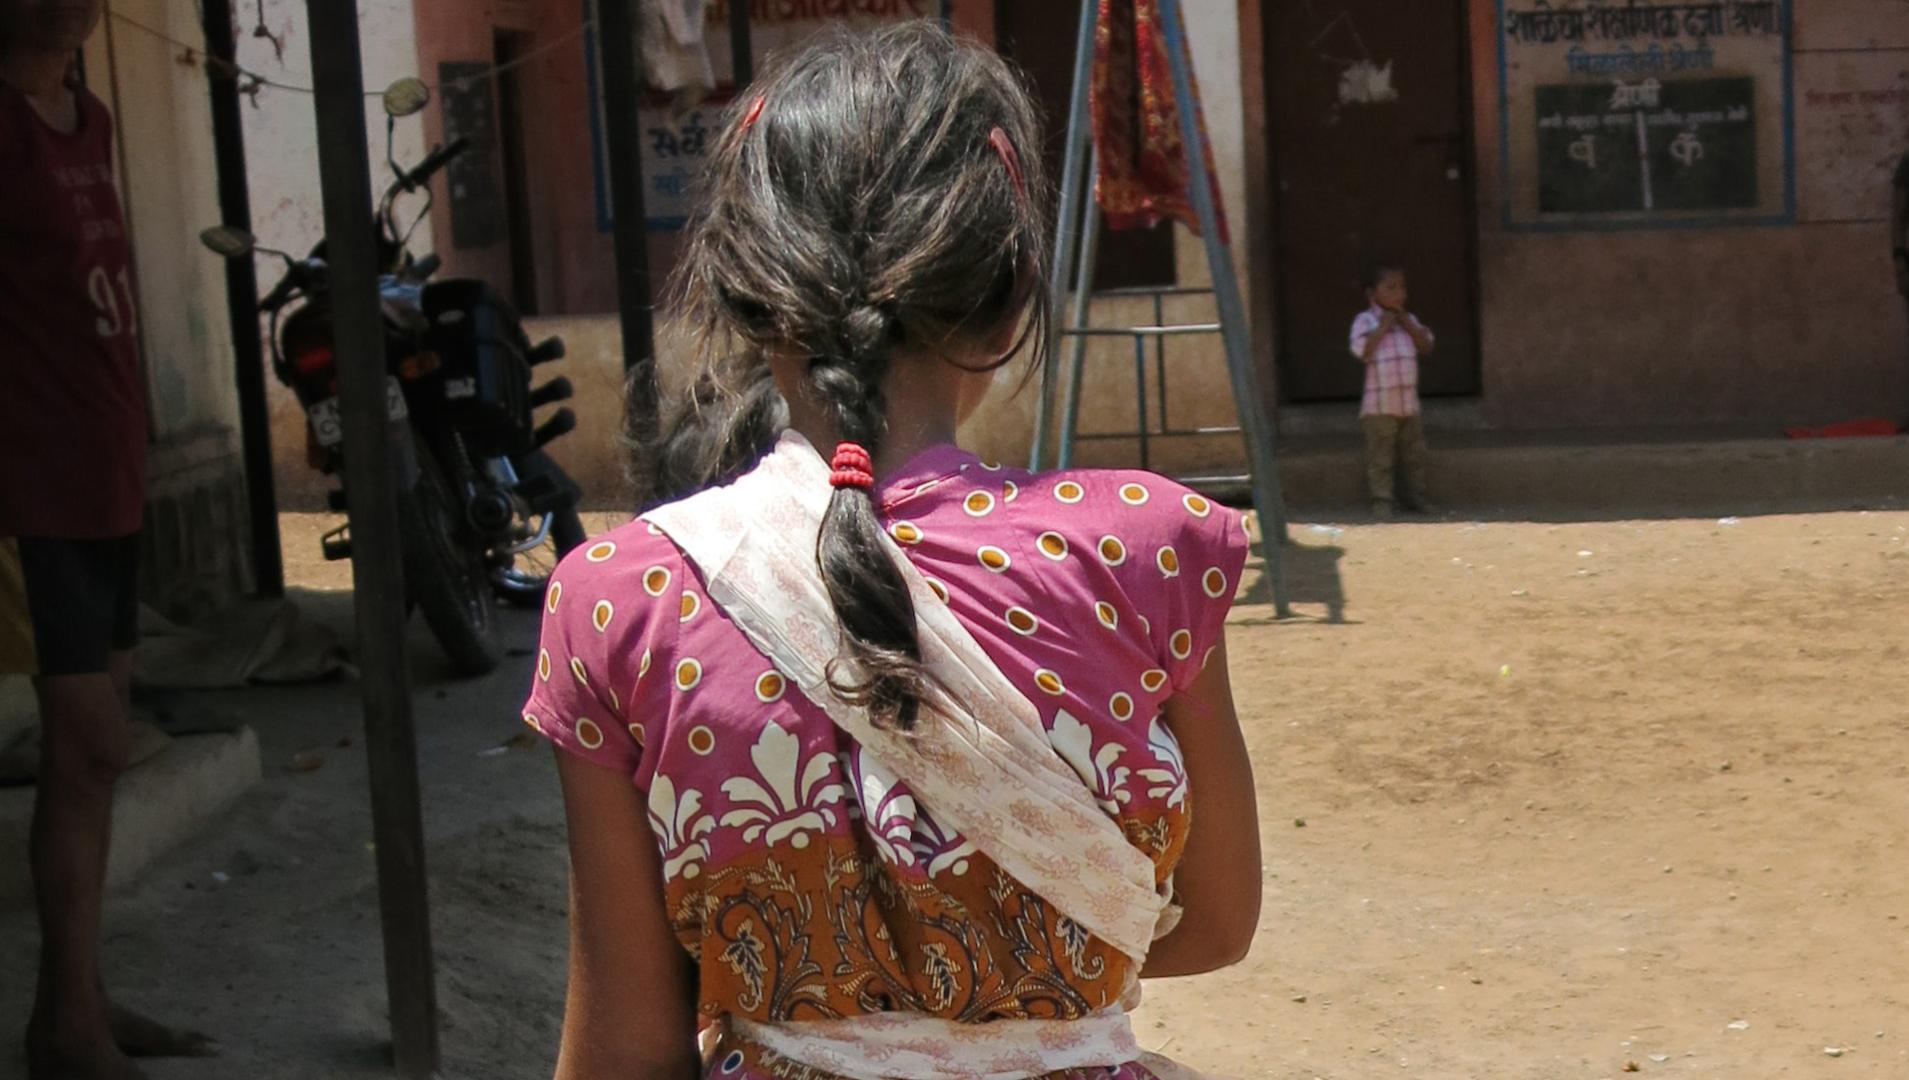 Village Rape Sex Porn Donlode - India village council punishes 13-year-old rape victim with whipping